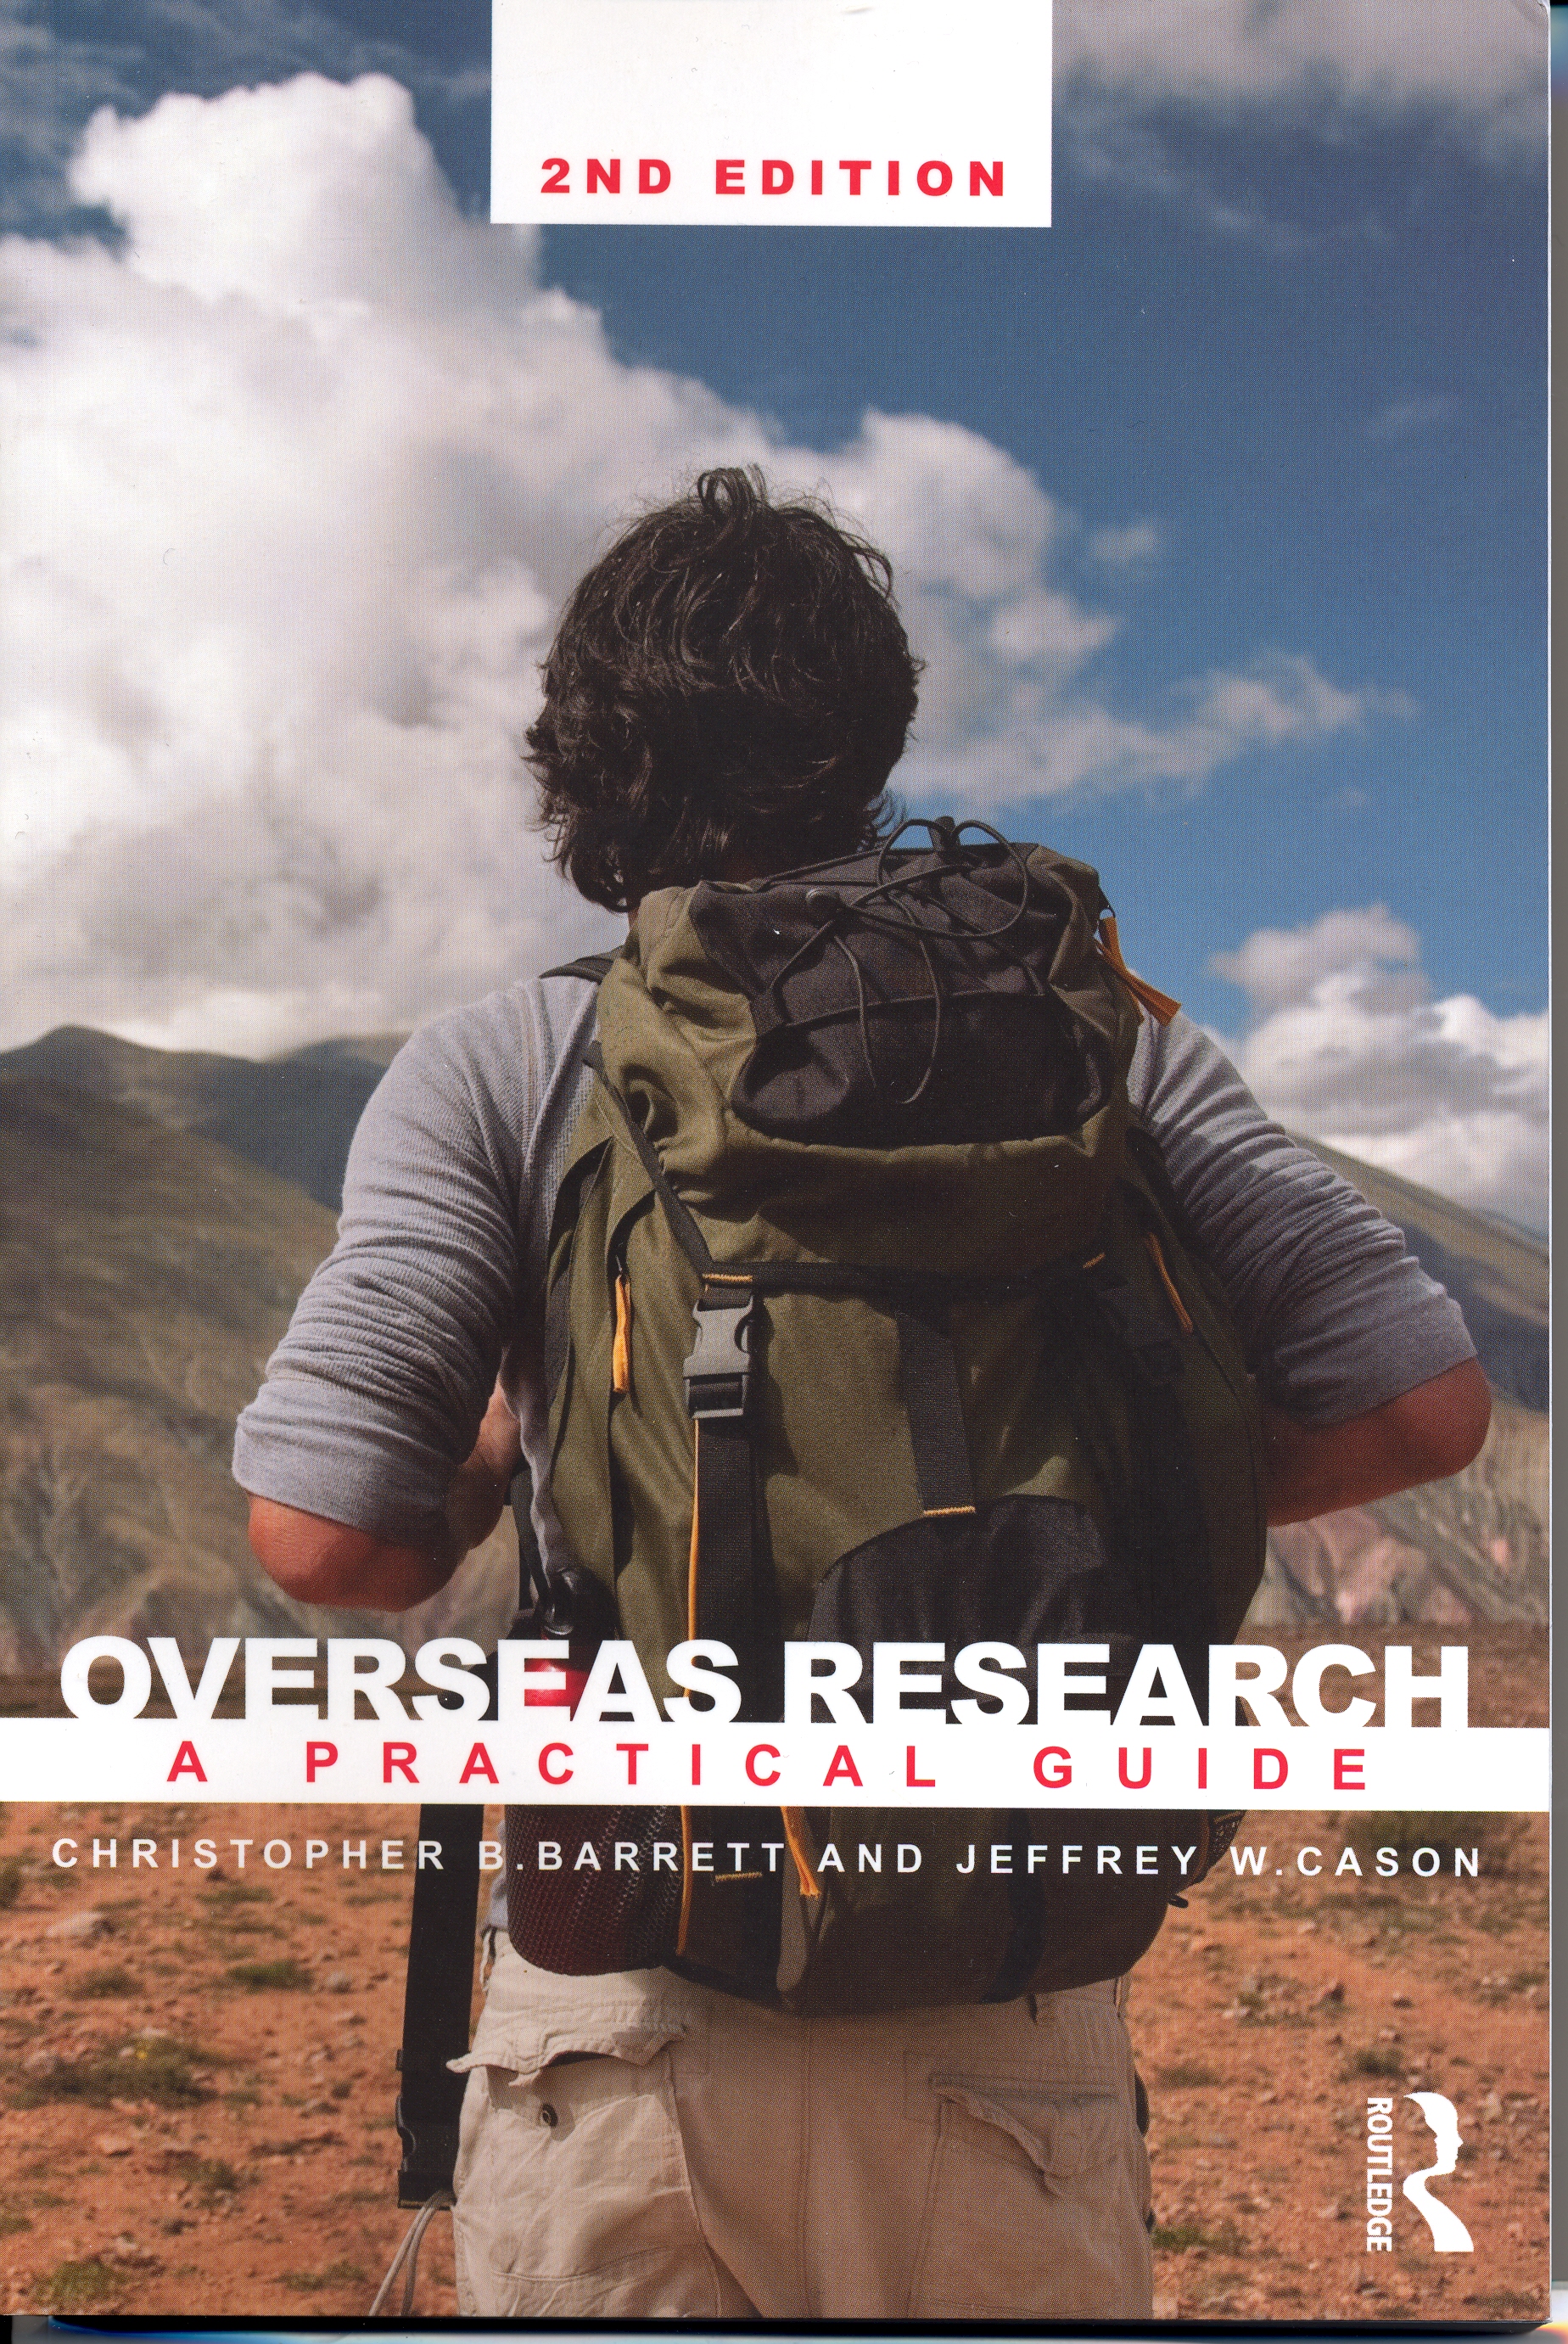 Overseas Research II: A Practical Guide